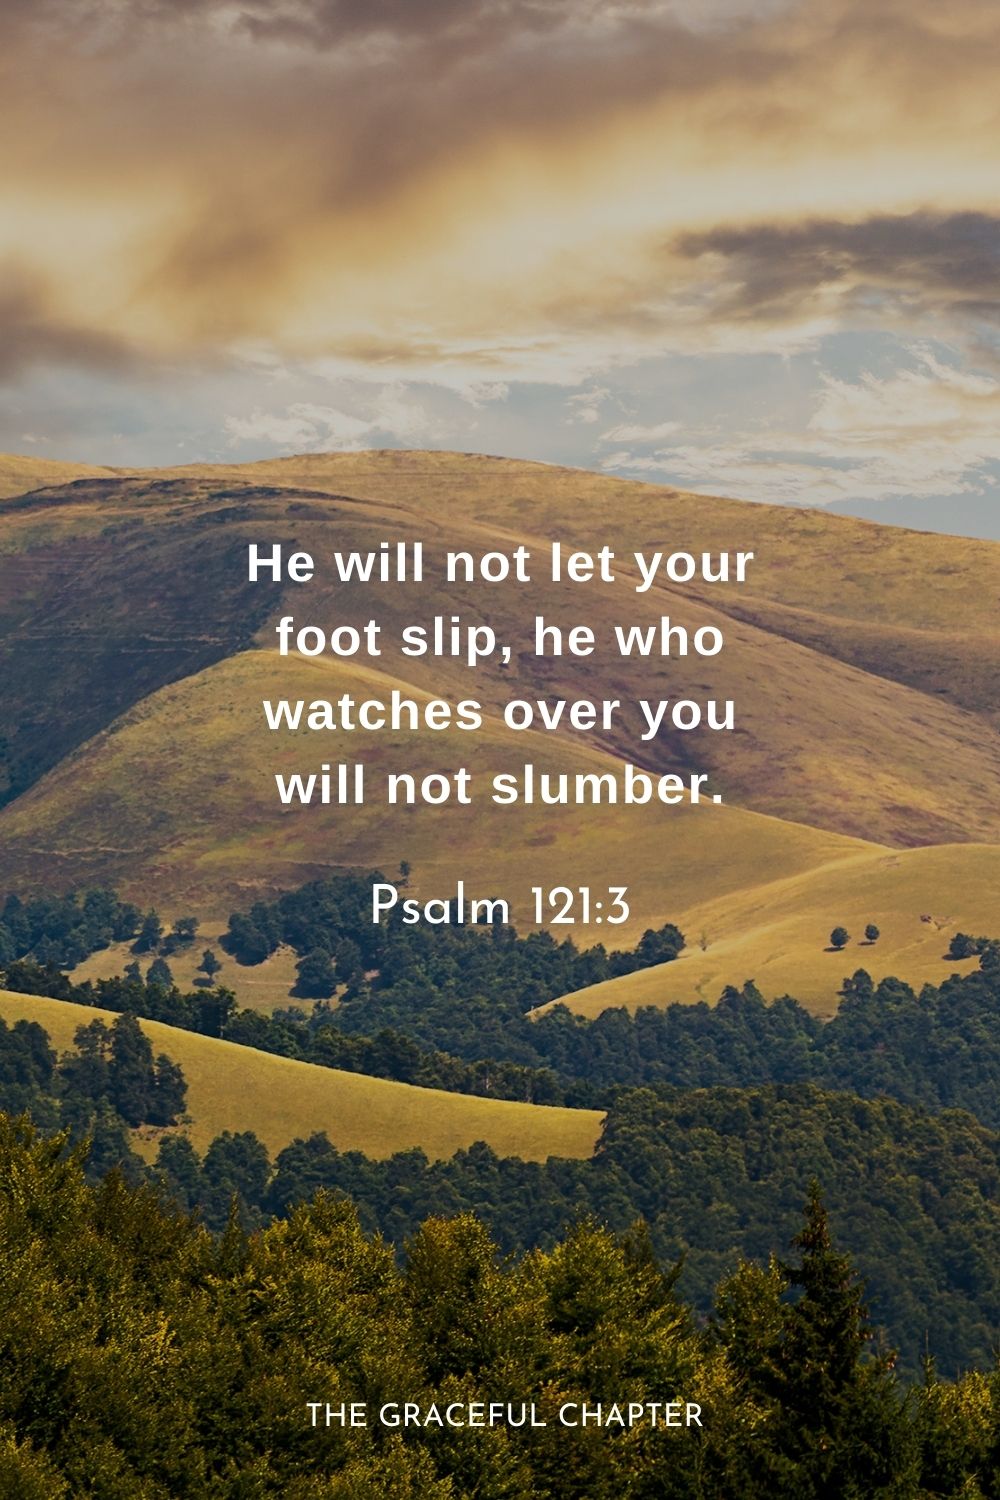 He will not let your foot slip, he who watches over you will not slumber.